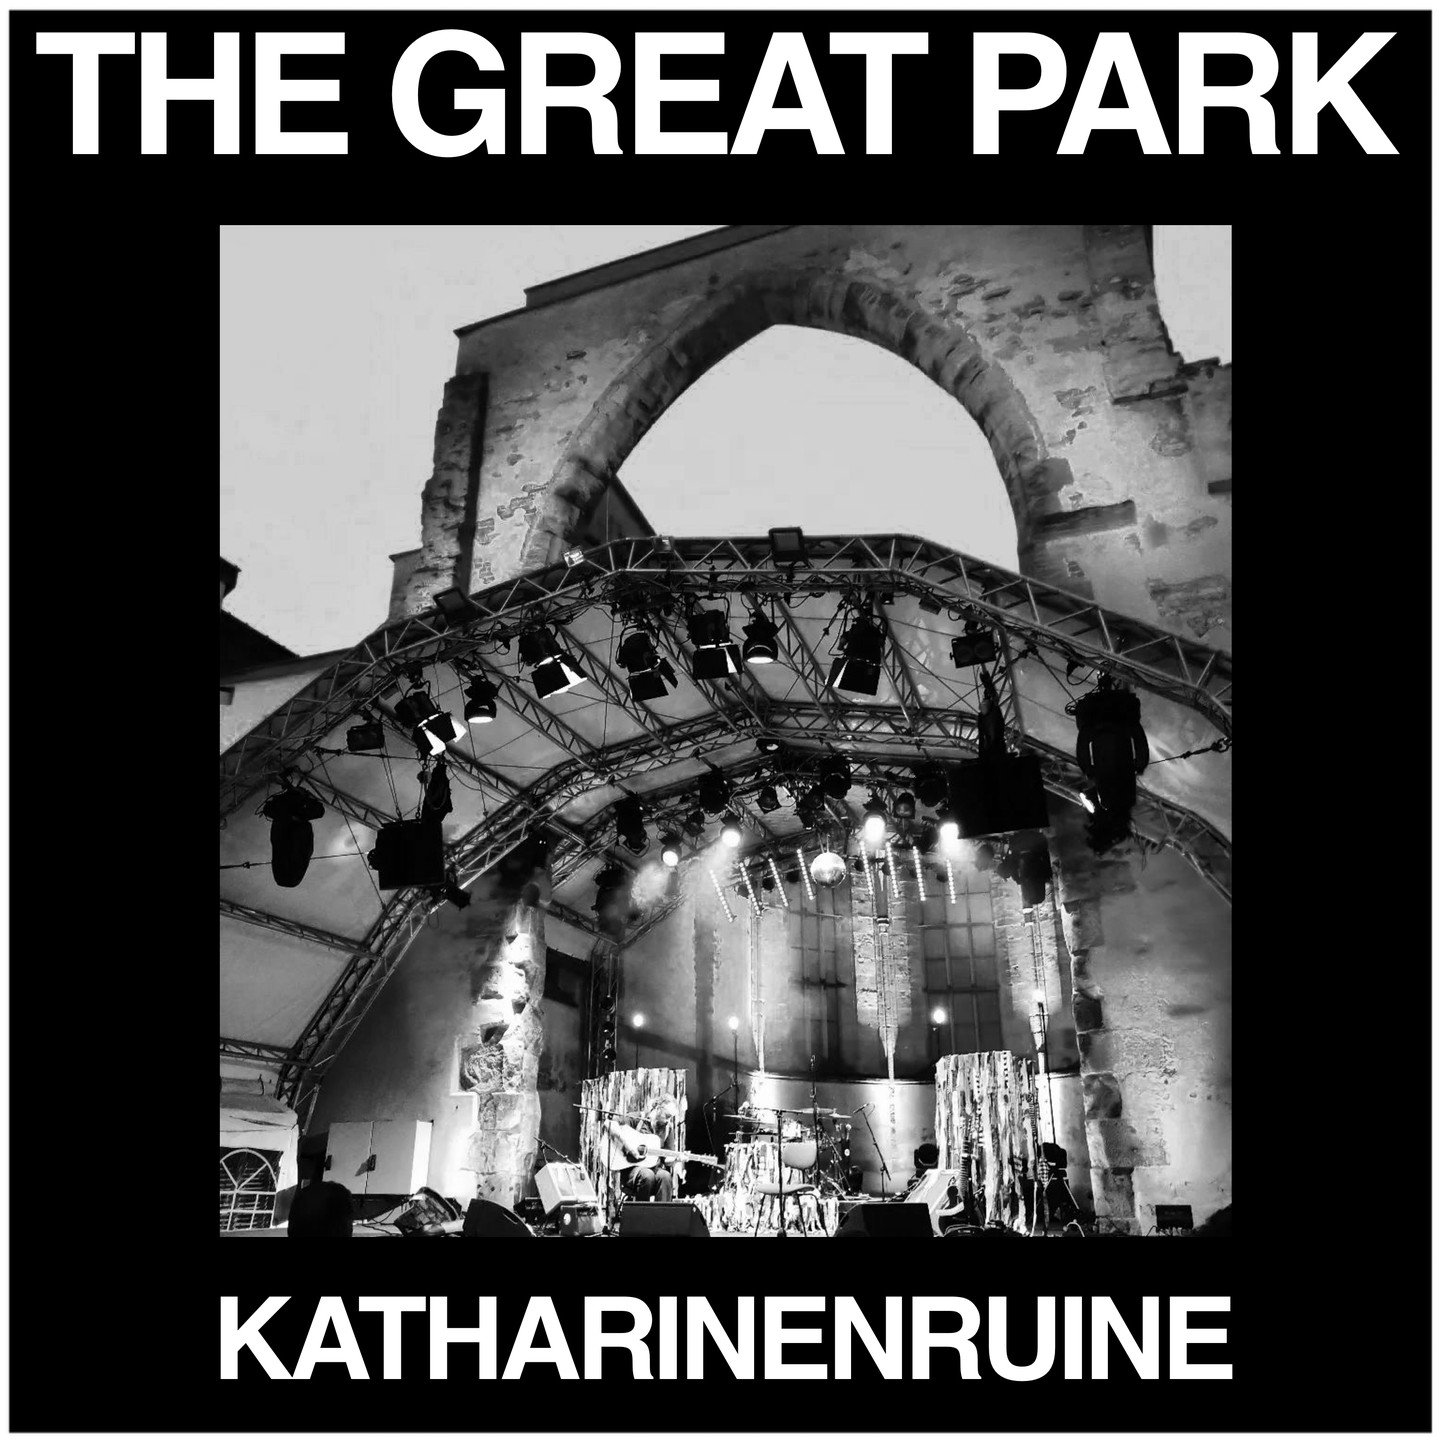 I have two recordings out today for everyone via my Bandcamp or Patreon sites. The first is this from the Katharinenruine in N&uuml;rnberg from 2022, featuring @julialauramusic on a couple of songs. Available as a full quality download and limited, h